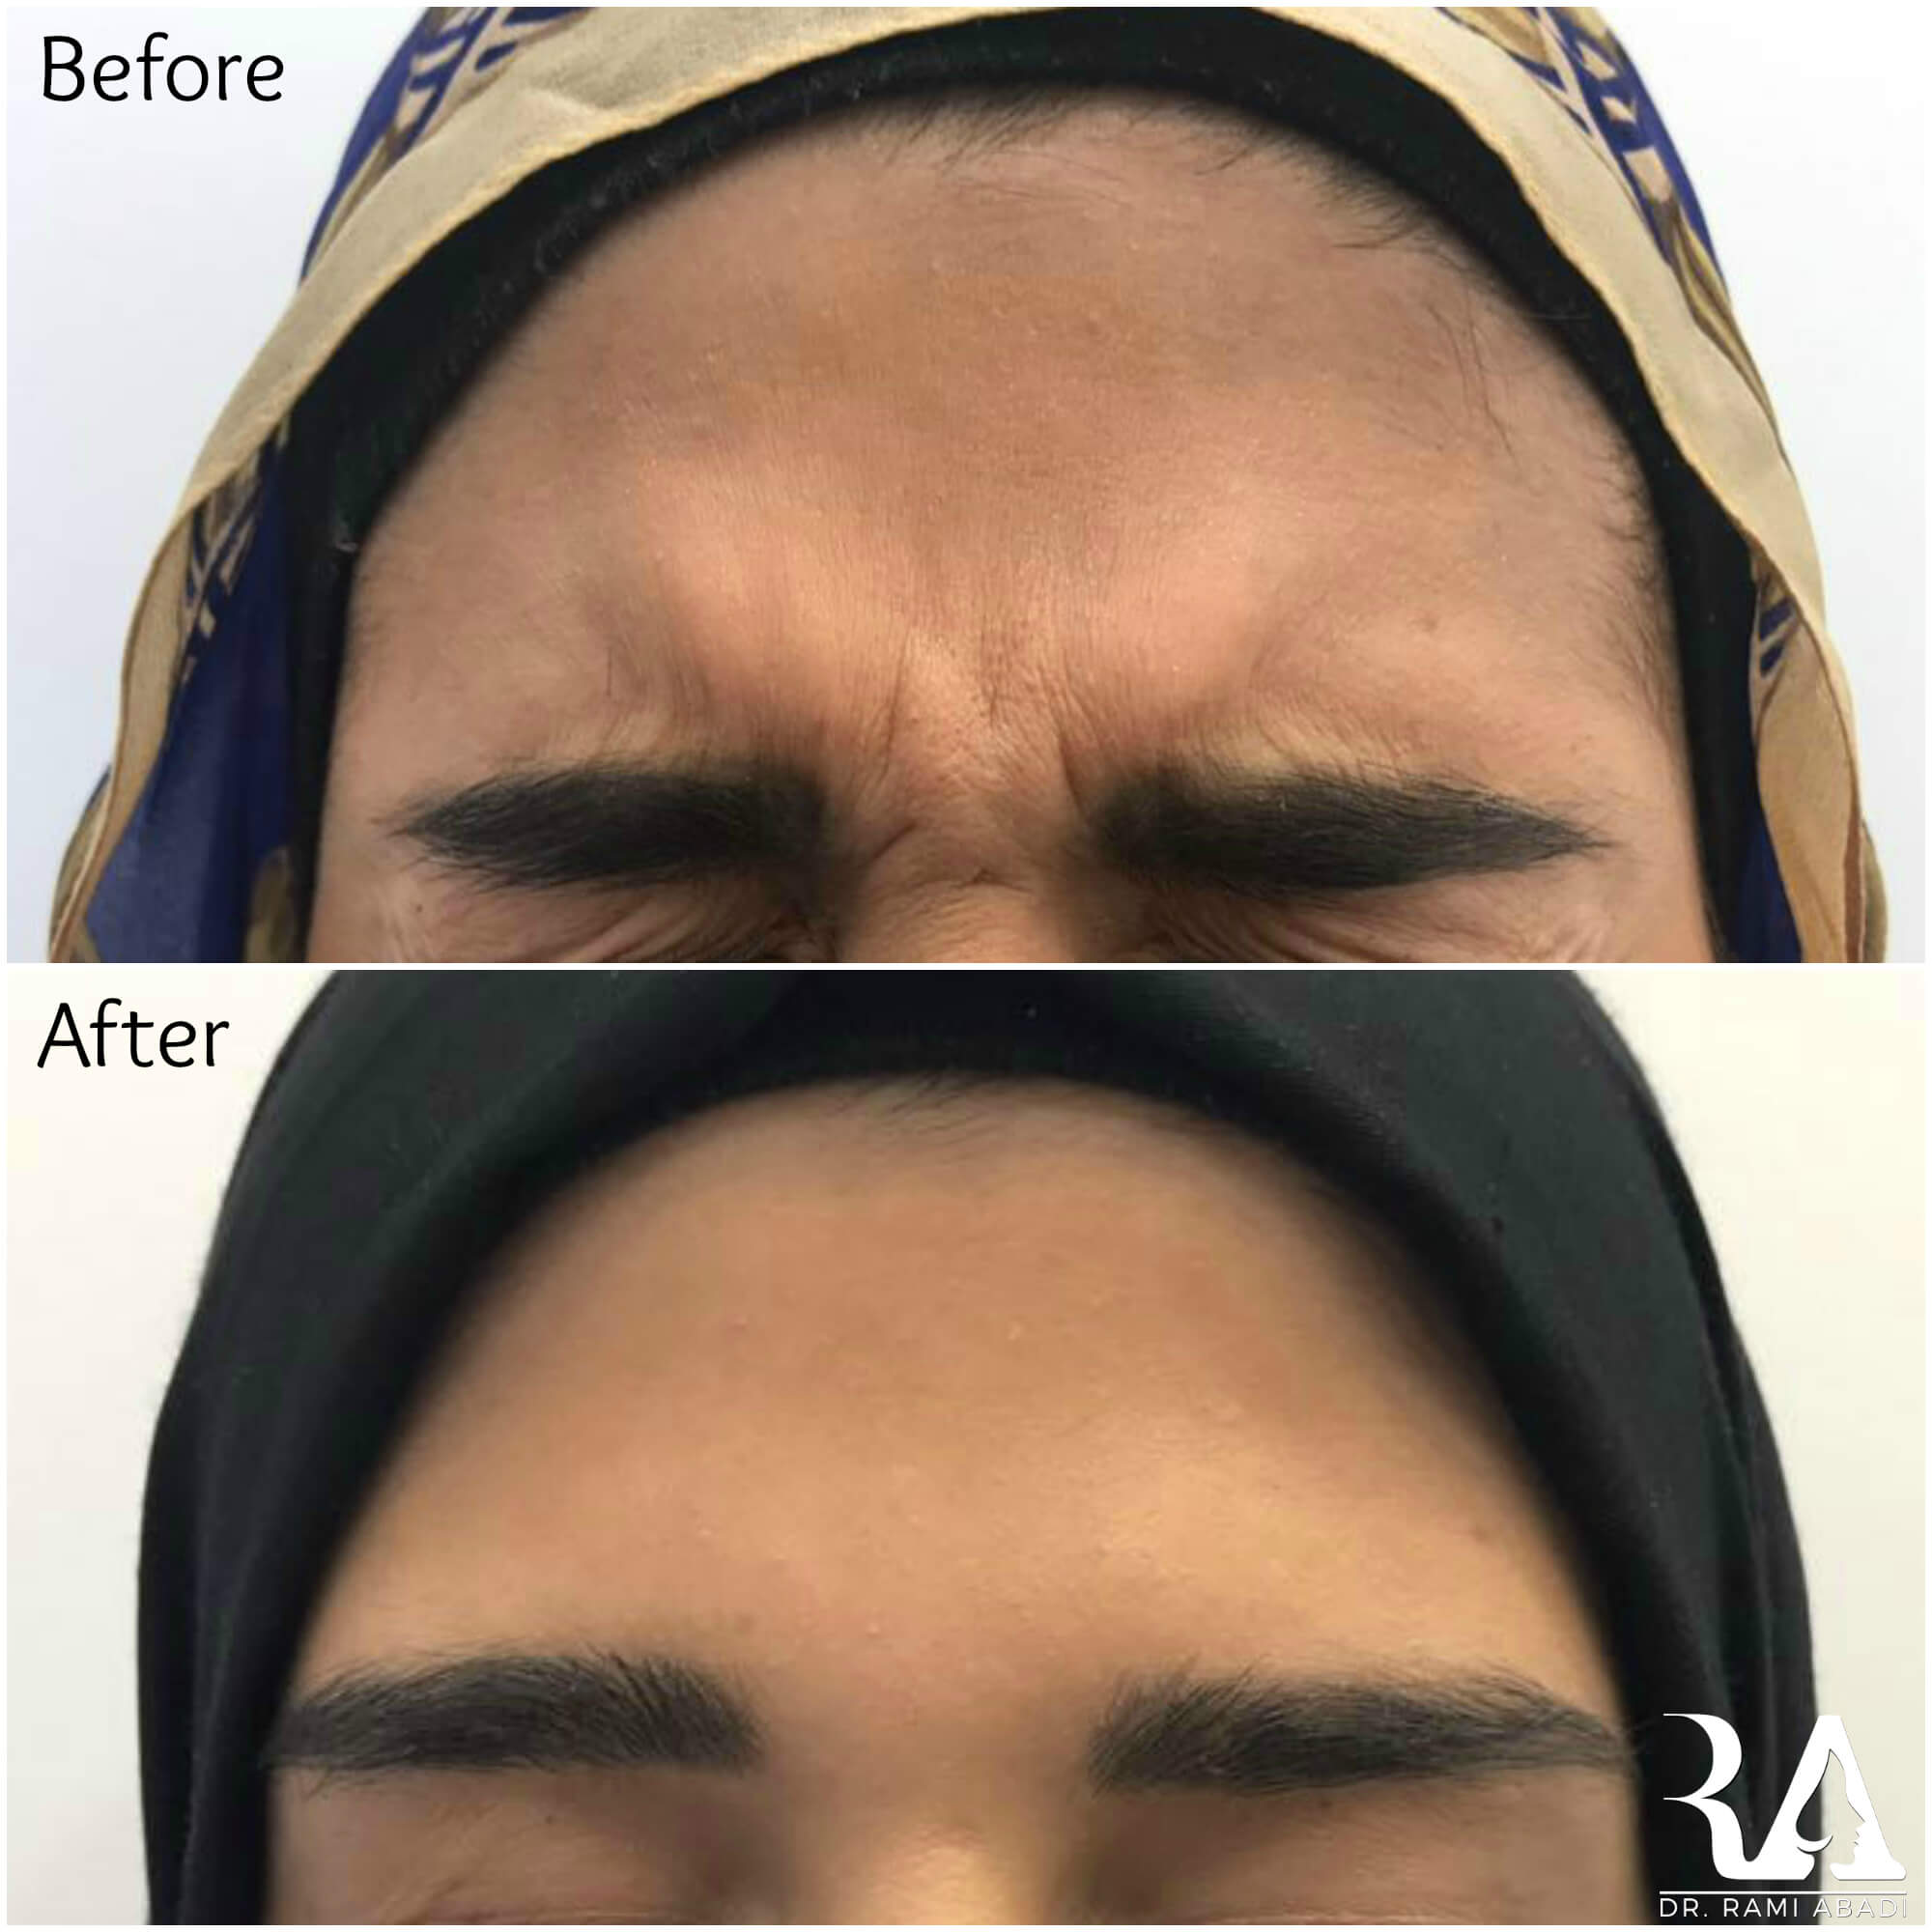 Botox for Frown Lines